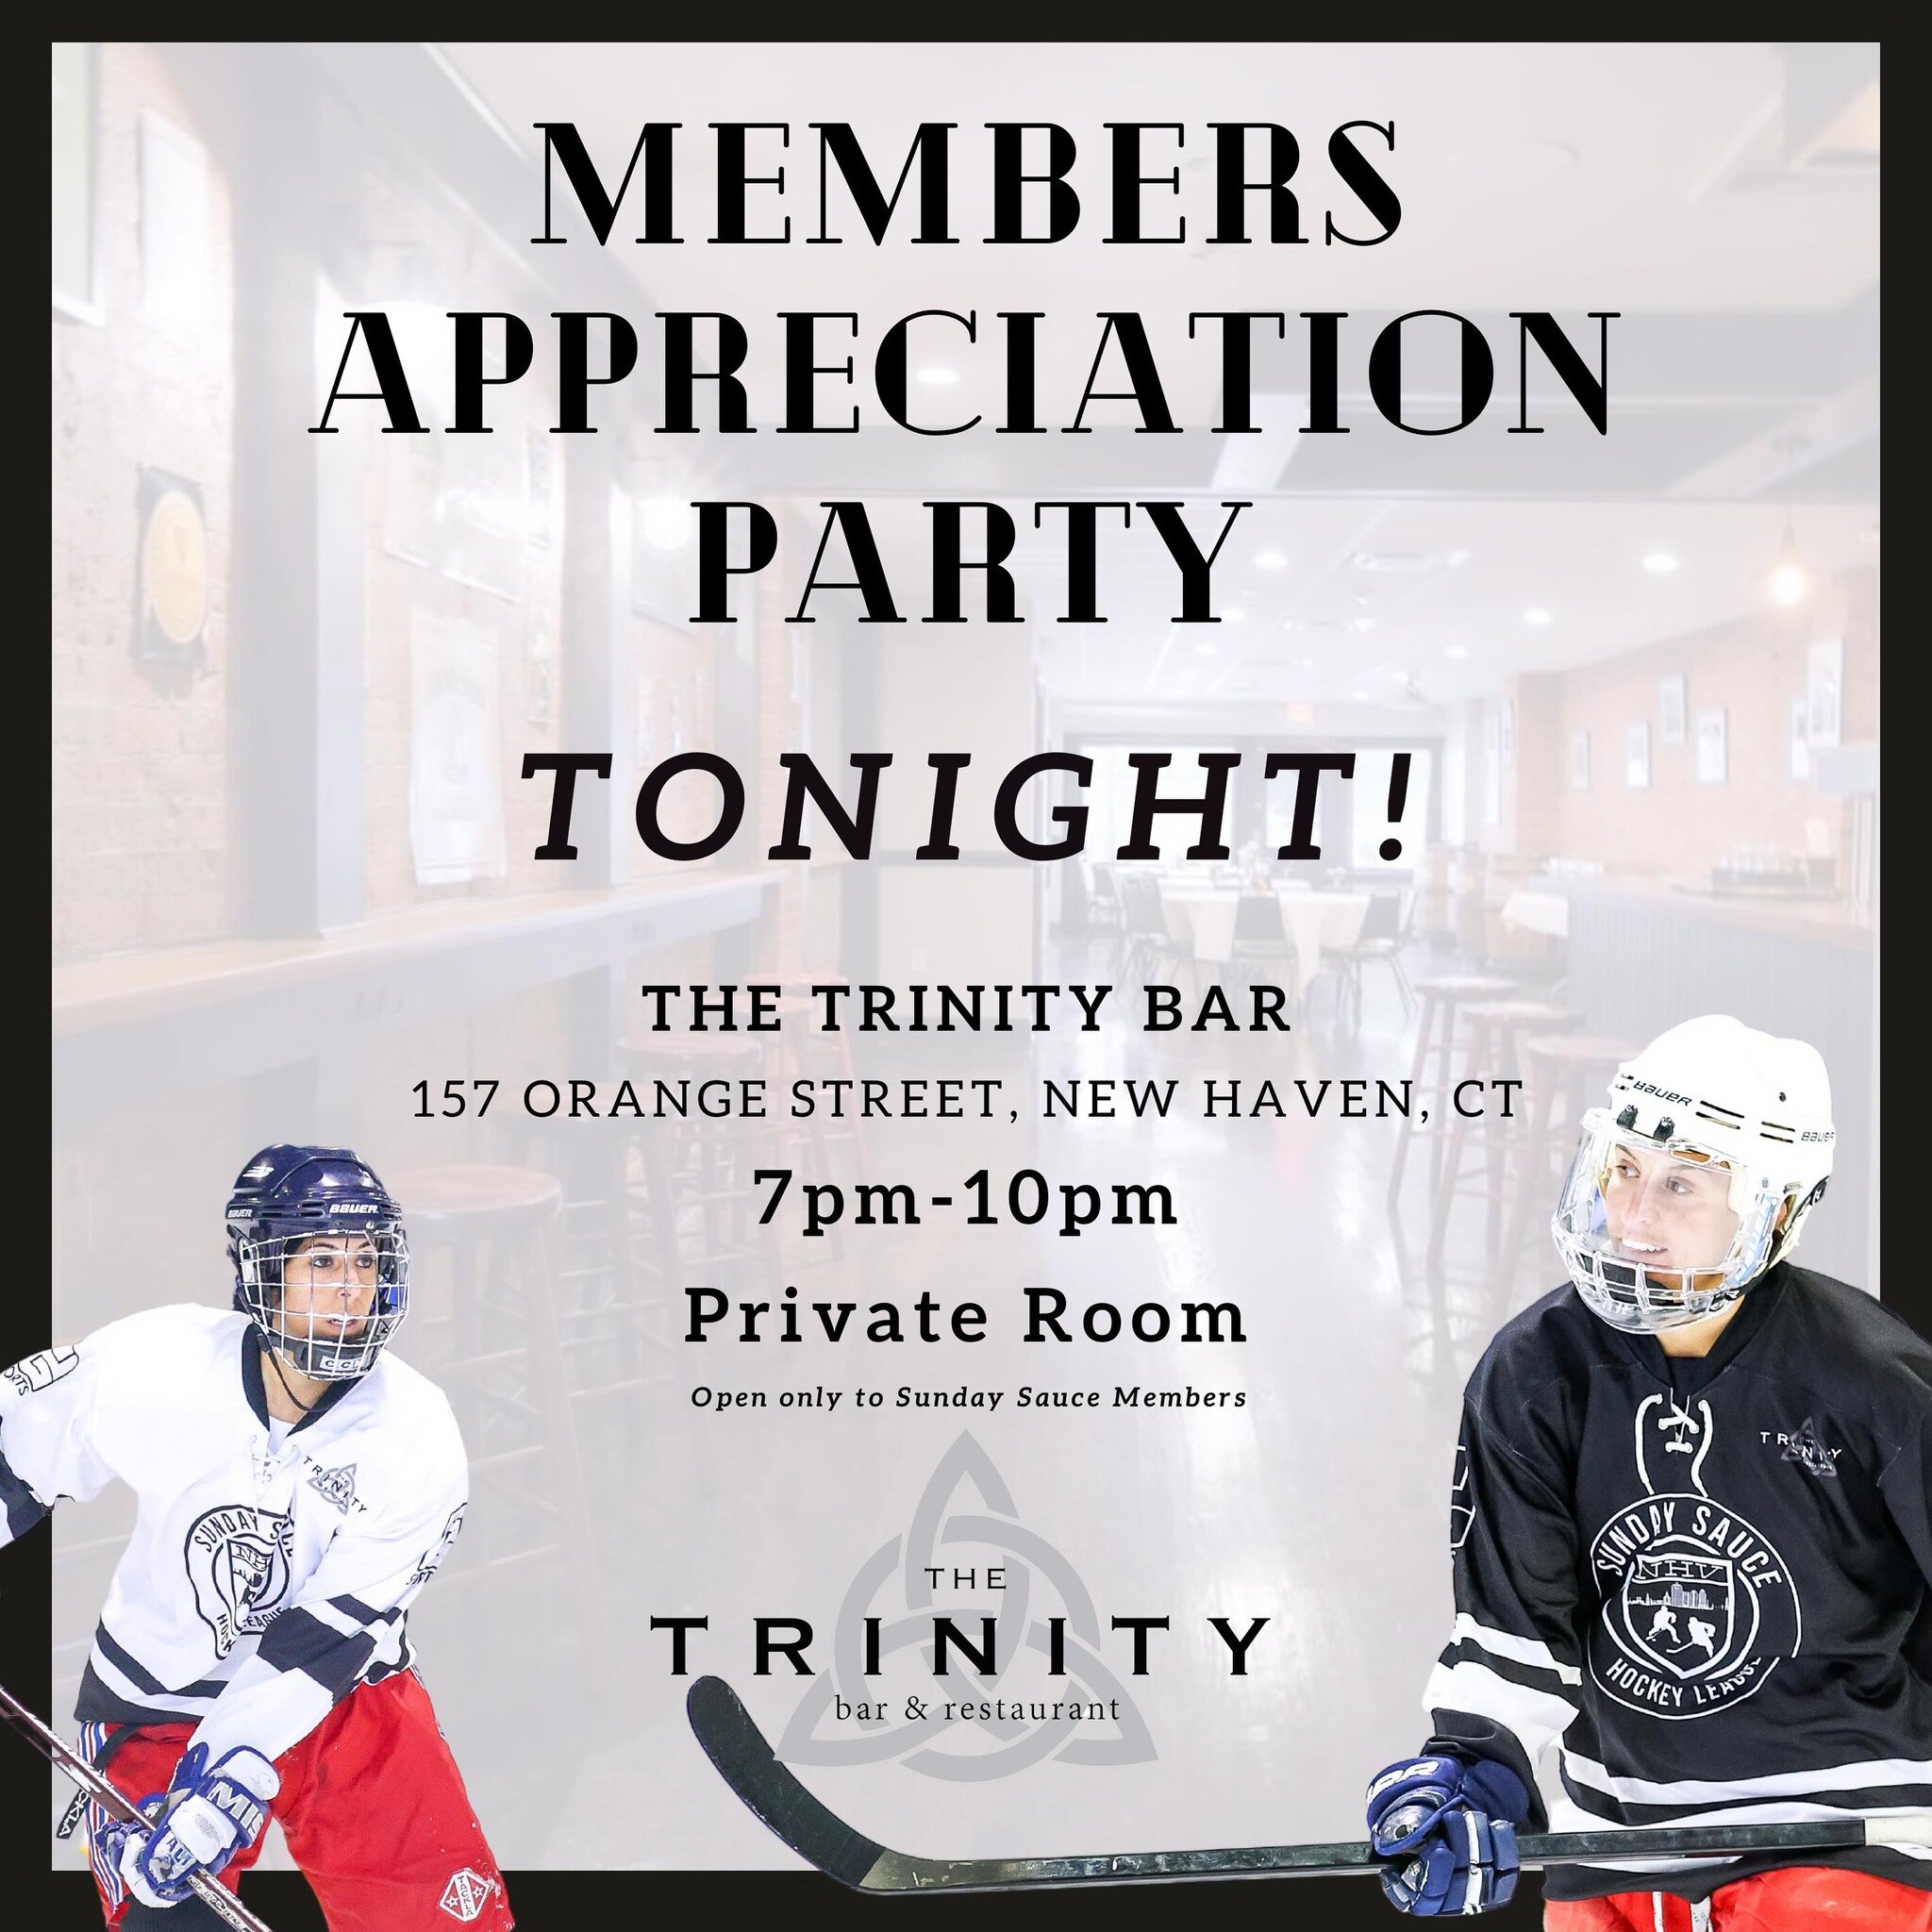 We are pumped for our Members Appreciation Party tonight at The Trinity Bar in New Haven. This event is open only to Sunday Sauce Members and will be hosted in the private party room from 7-10pm. The main bar and kitchen are open to the general publi